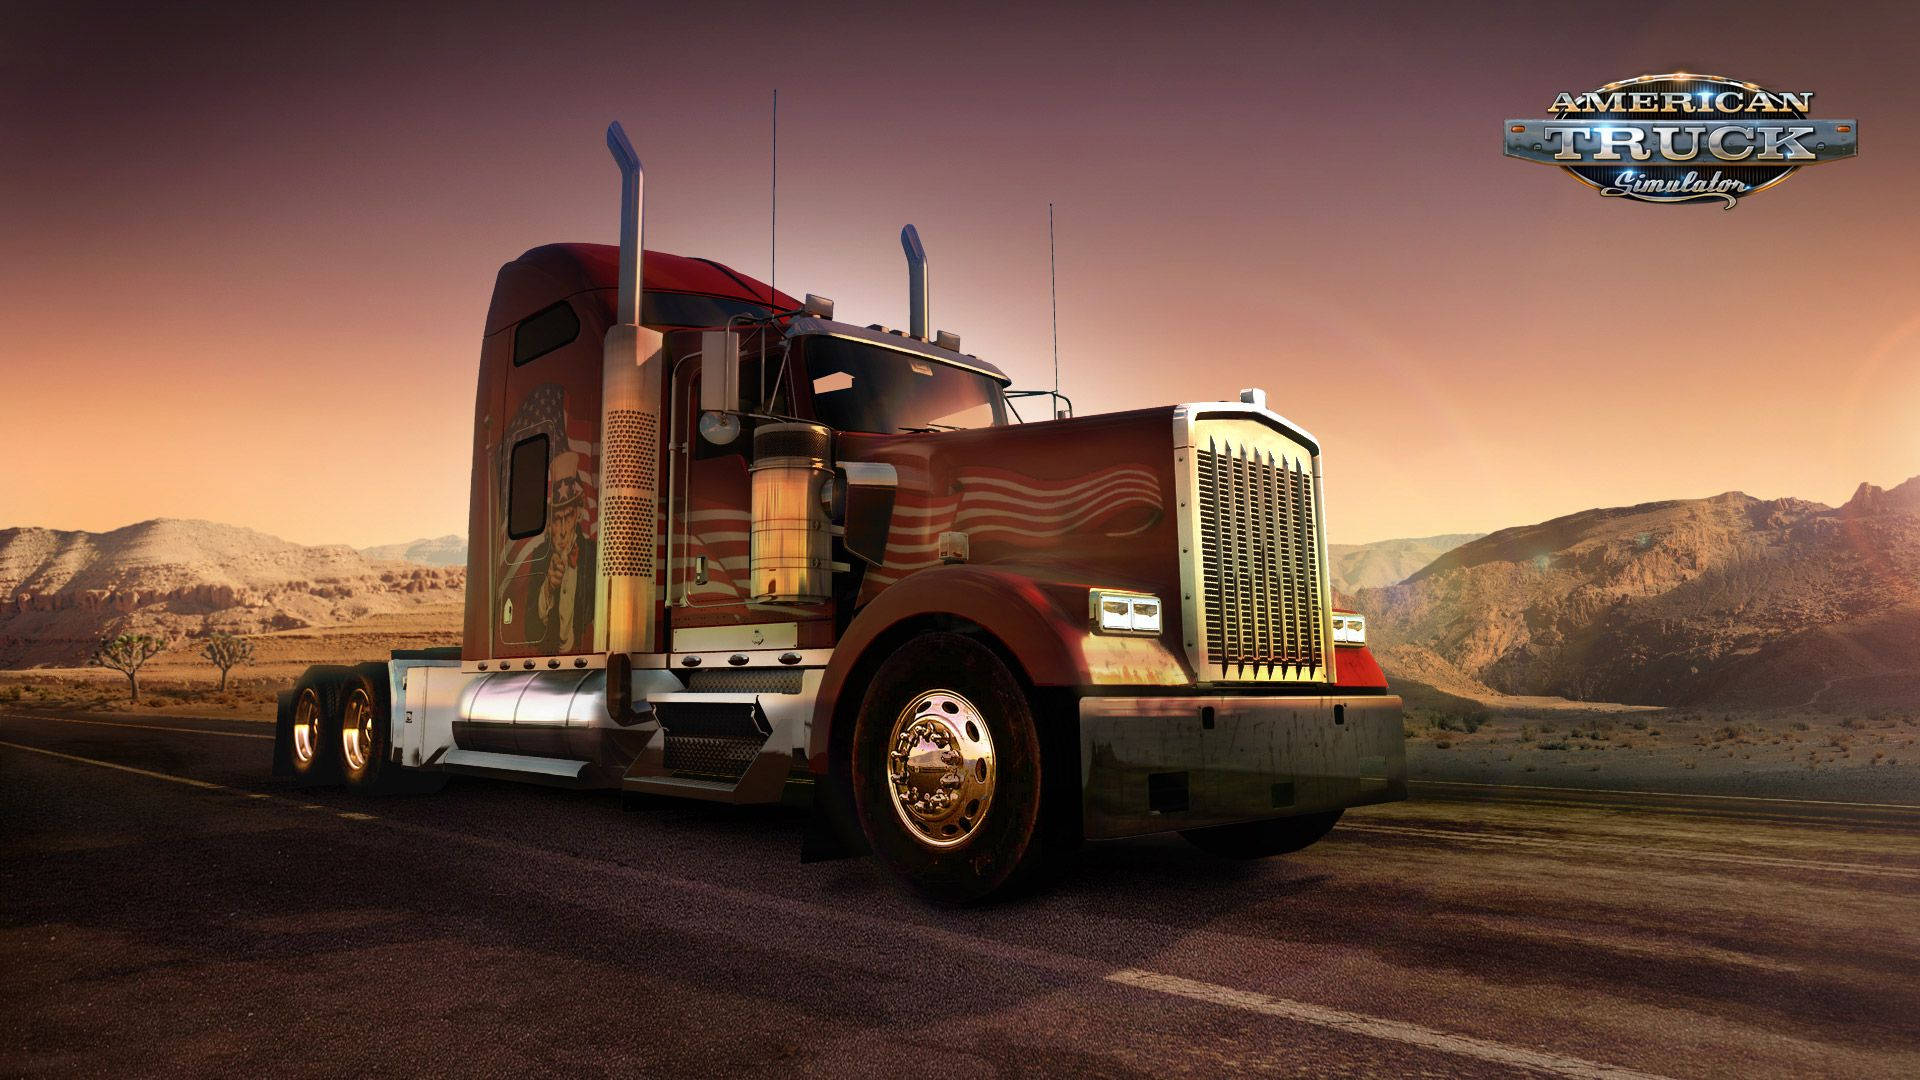 Caption: Majestic American Highway - American Truck Simulator Driving Experience Background